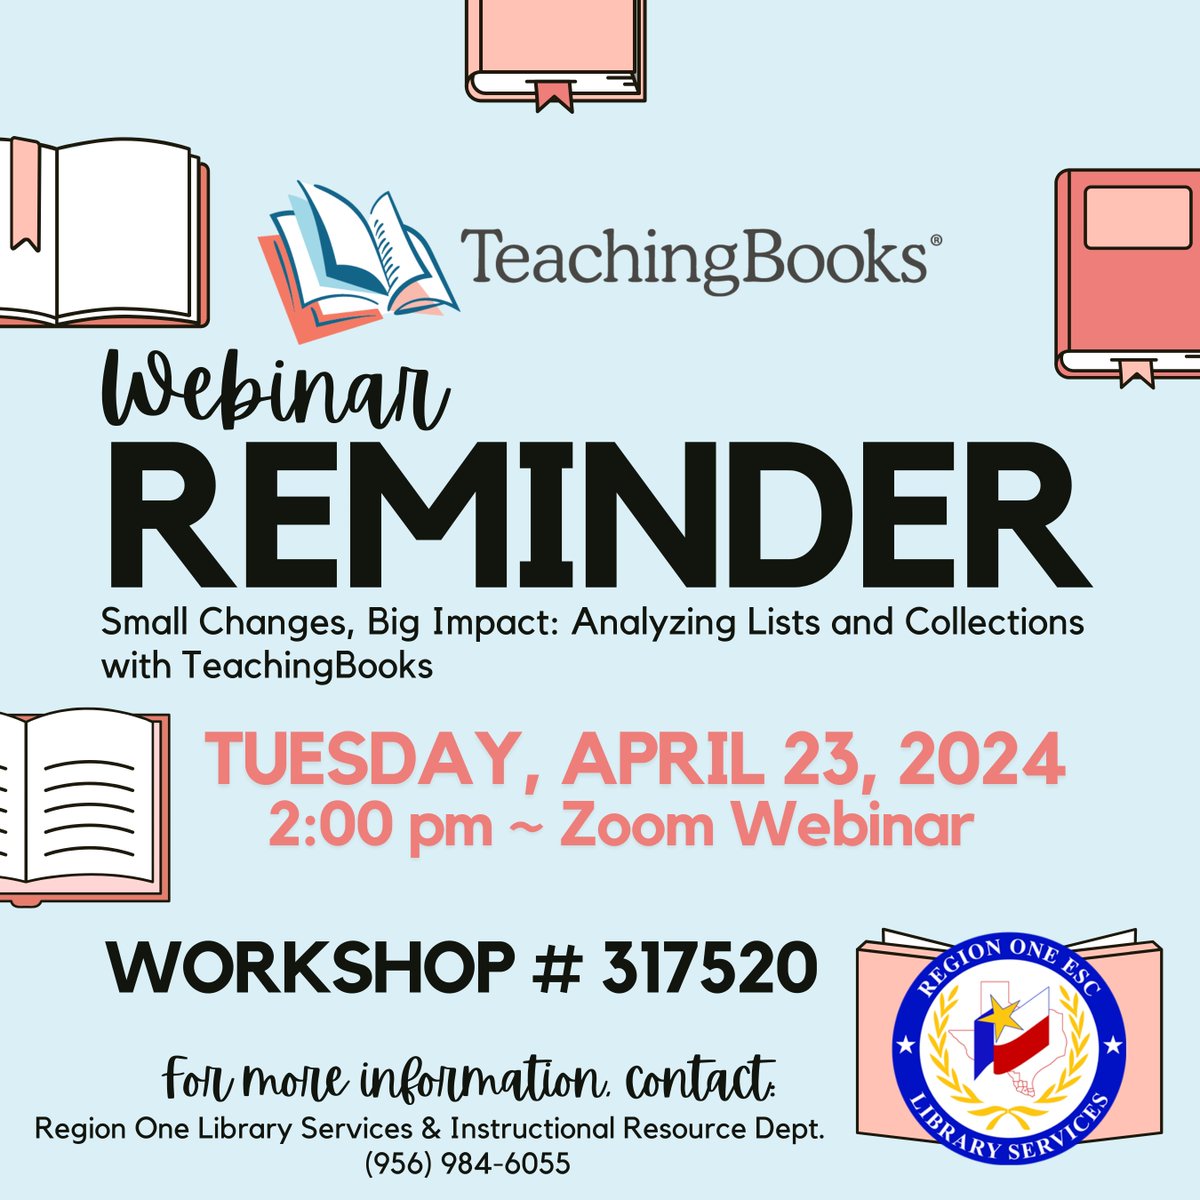 𝙍𝙚𝙜𝙞𝙤𝙣 𝙊𝙣𝙚 𝙀𝙎𝘾 𝙇𝙞𝙗𝙧𝙖𝙧𝙞𝙖𝙣𝙨! 📚 Don't miss tomorrow's @TeachingBooks webinar, 'Small Changes, Big Impact: Analyzing Lists and Collections with TeachingBooks,' @ 2:00 PM via Zoom. You can register for the webinar here: apps.esc1.net/ProfessionalDe…